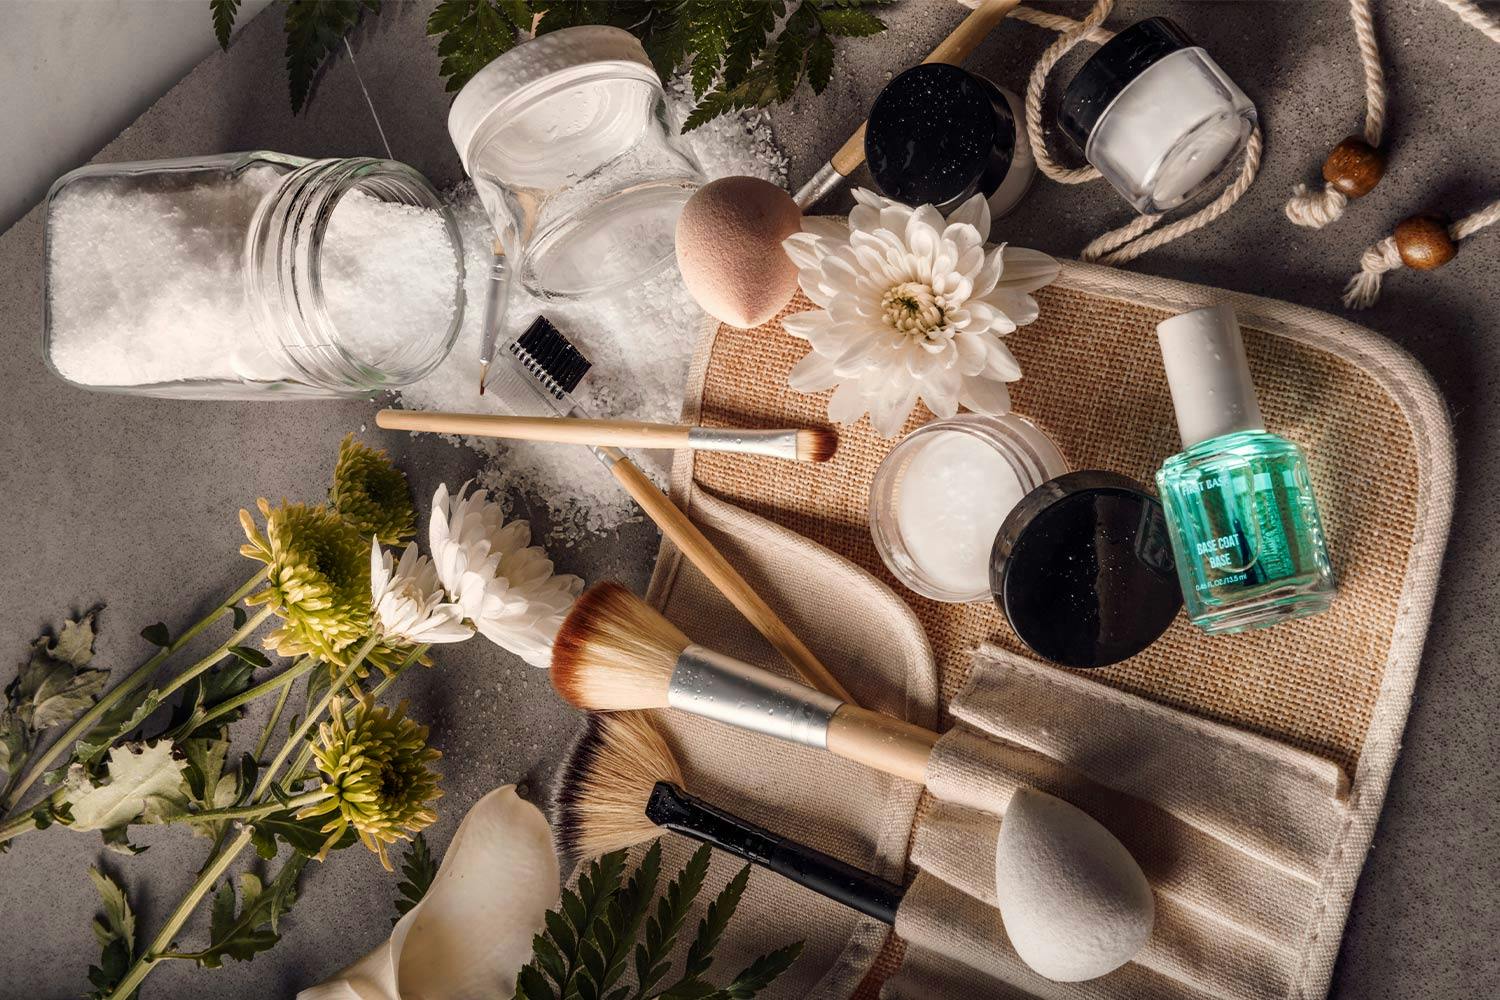 Makeup brushes in a roll-up case, small containers, nail polish, and flowers spread out on a grey table.